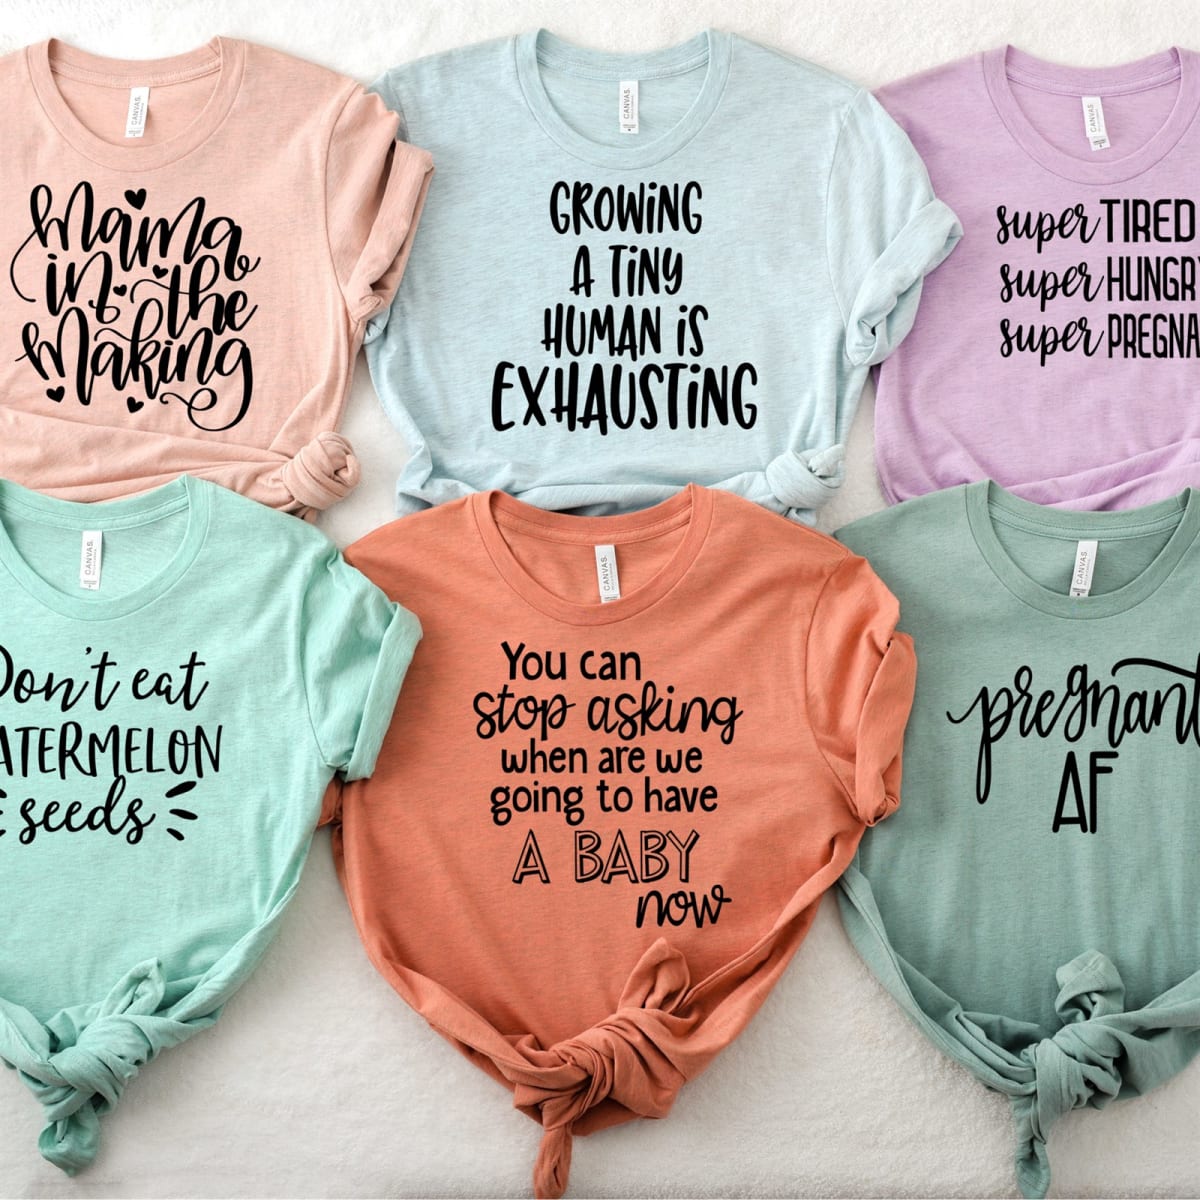 Pregnancy Announcement Tees A Thrifty Mom Recipes Crafts DIY And More